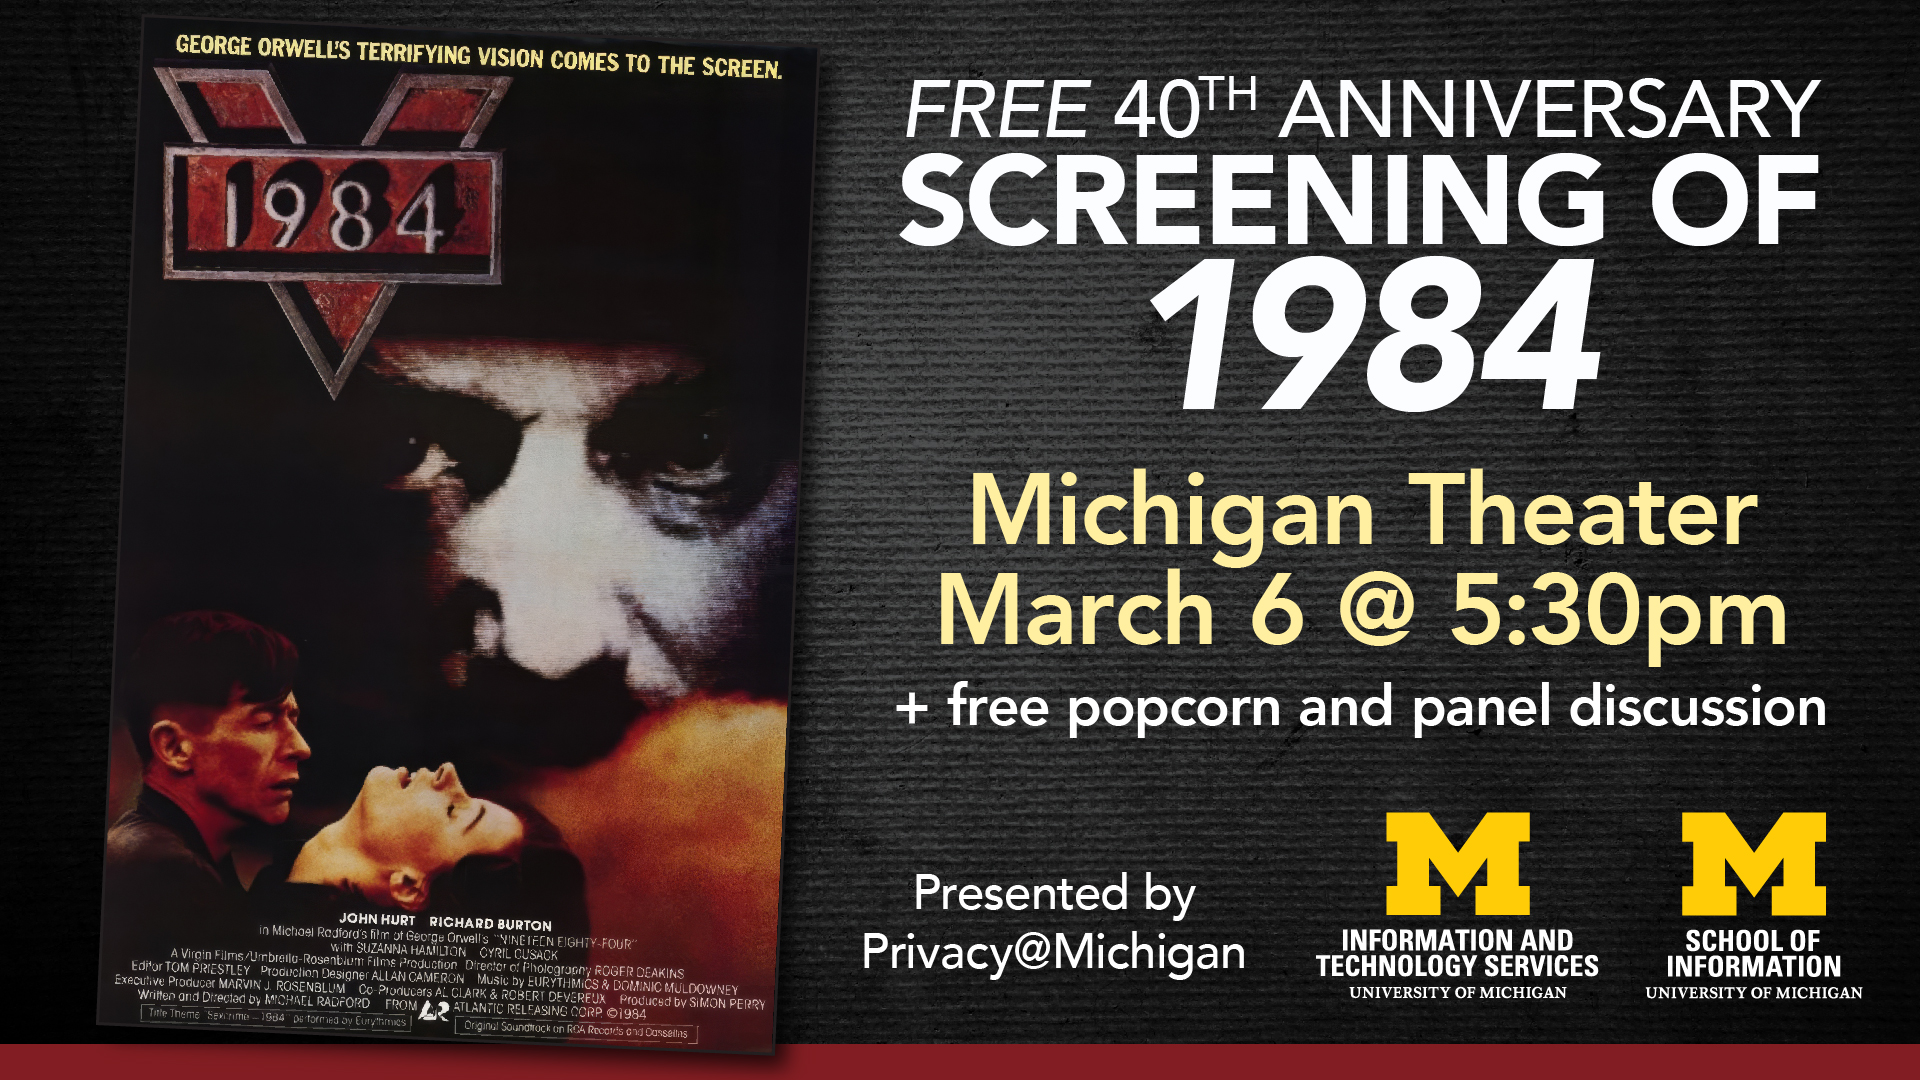 "Free 40th anniversary screening of 1984. Michigan Theater. March 6 @ 5:30 pm. Free popcorn and panel discussion. Presented by Privacy@Michigan. UMSI and U-M Information and Technology Services." Cover art for 1984 film version of 1984.